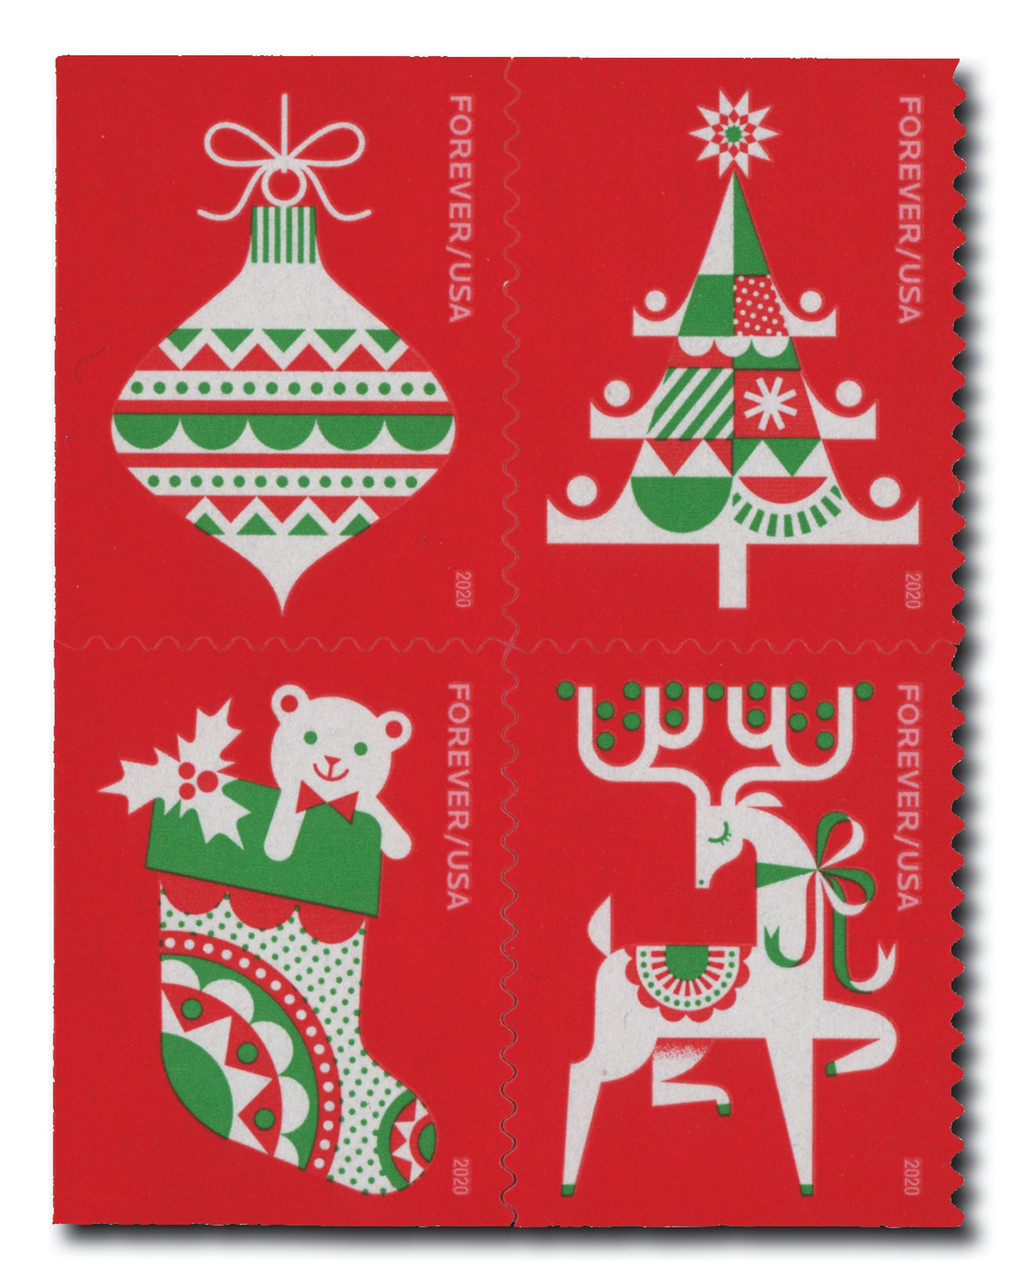 Sparkling Holiday Forever Postage Stamp 2 Books of 20 First Class US Postal  Christmas Celebrations Wedding Anniversary Party Traditions (40 Stamps)